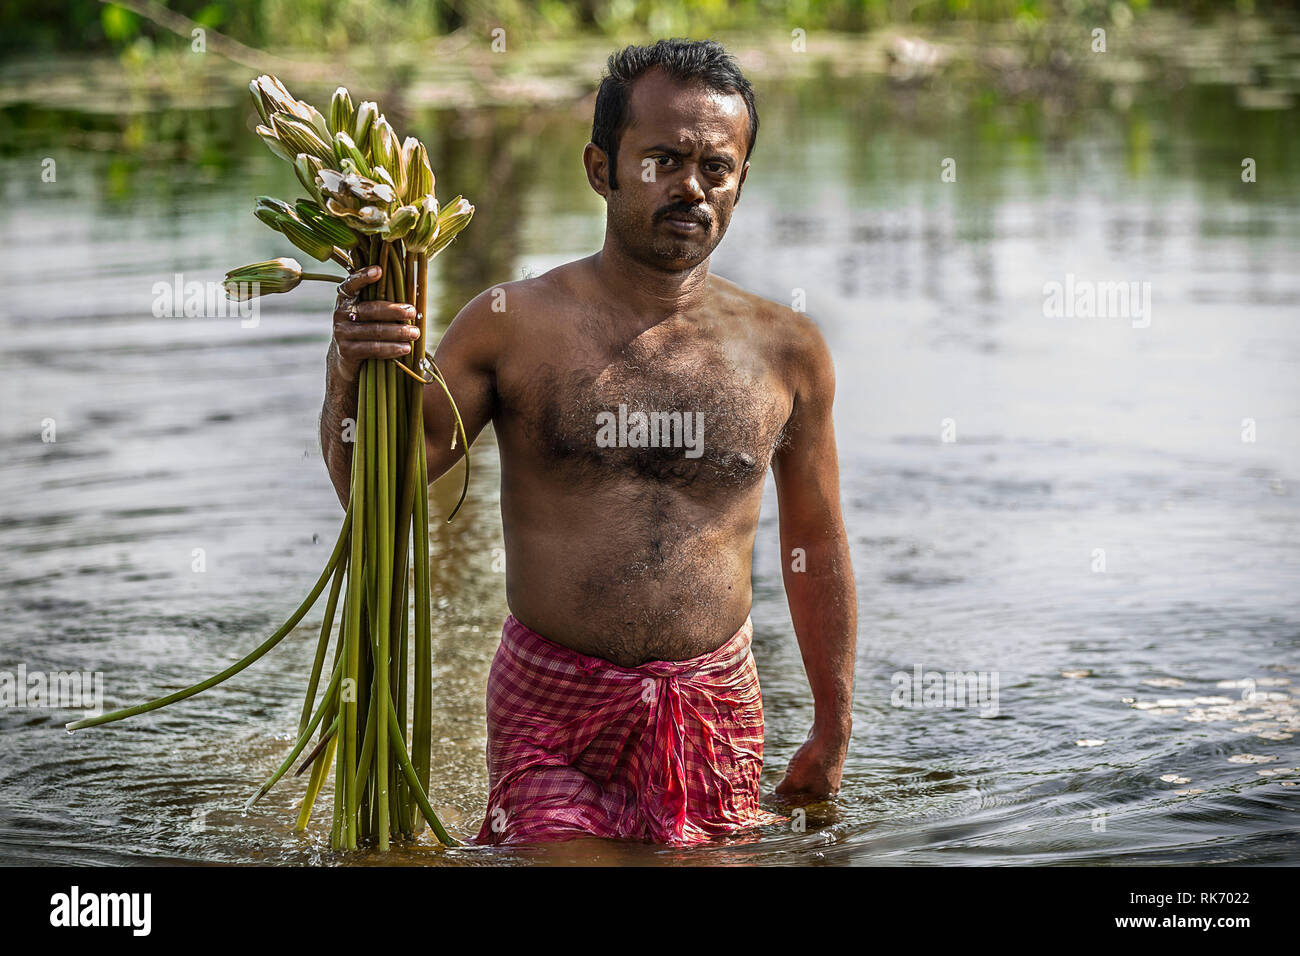 A man with bare chest wades through and collects lotus flowers from a small  lake in Rajasthan, India for use in temple ceremonies Stock Photo - Alamy